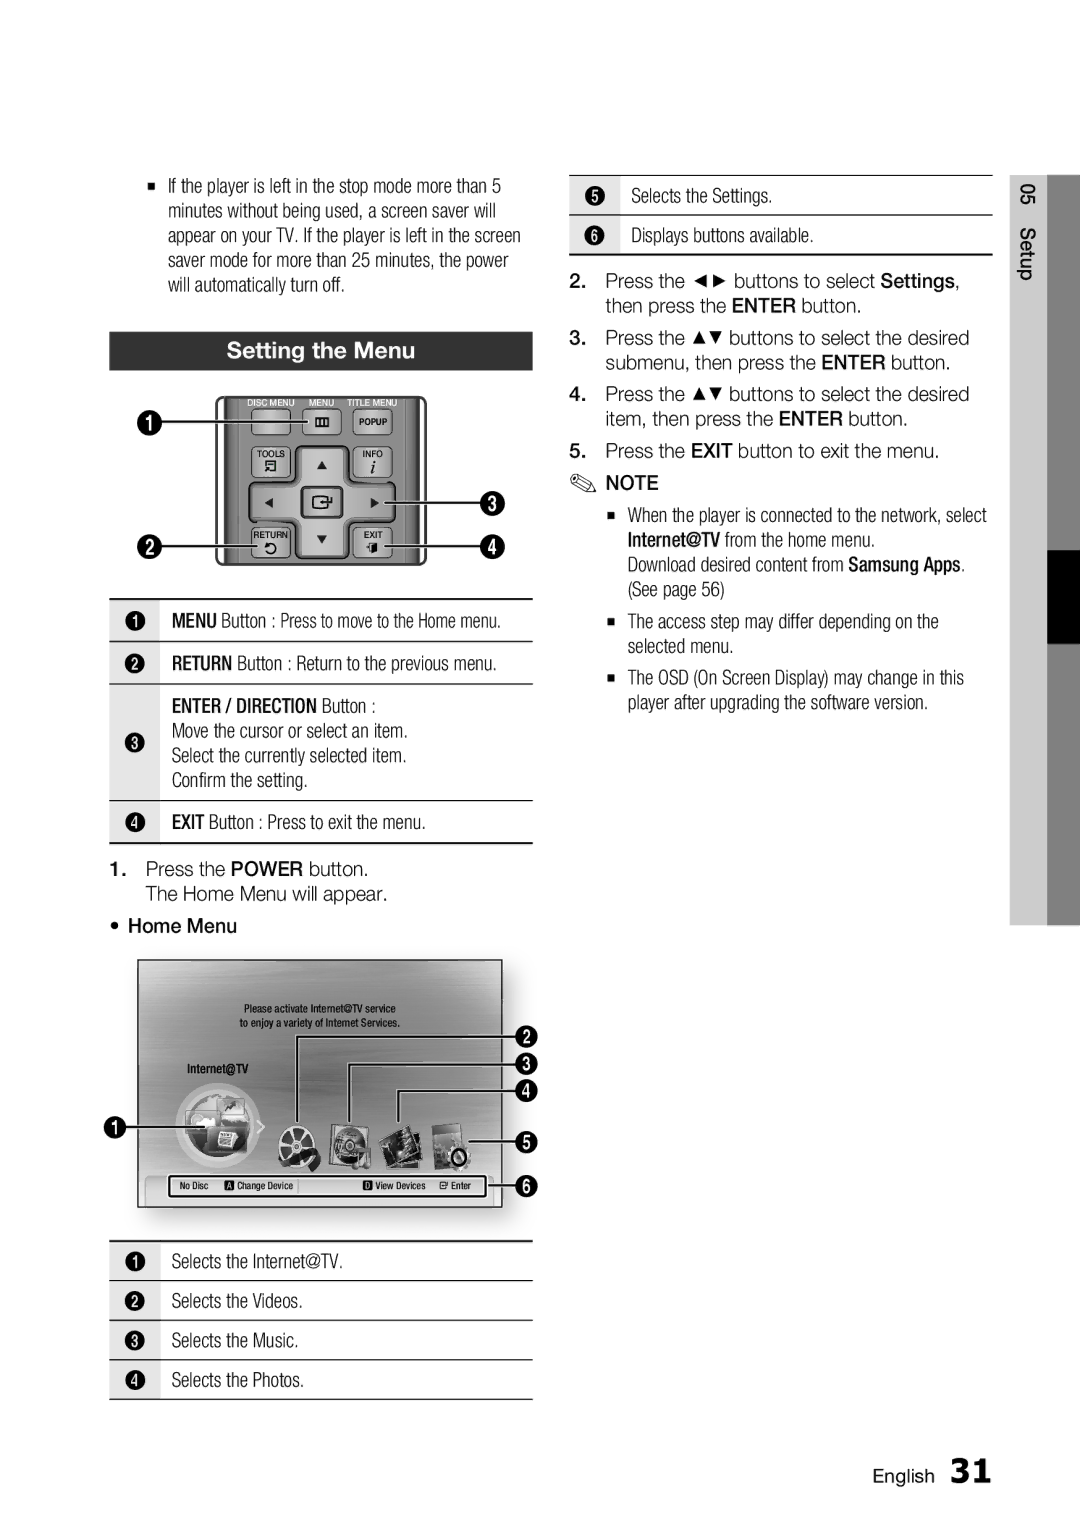 Samsung BD-C7500 user manual Setting the Menu, Move the cursor or select an item, Exit Button Press to exit the menu 